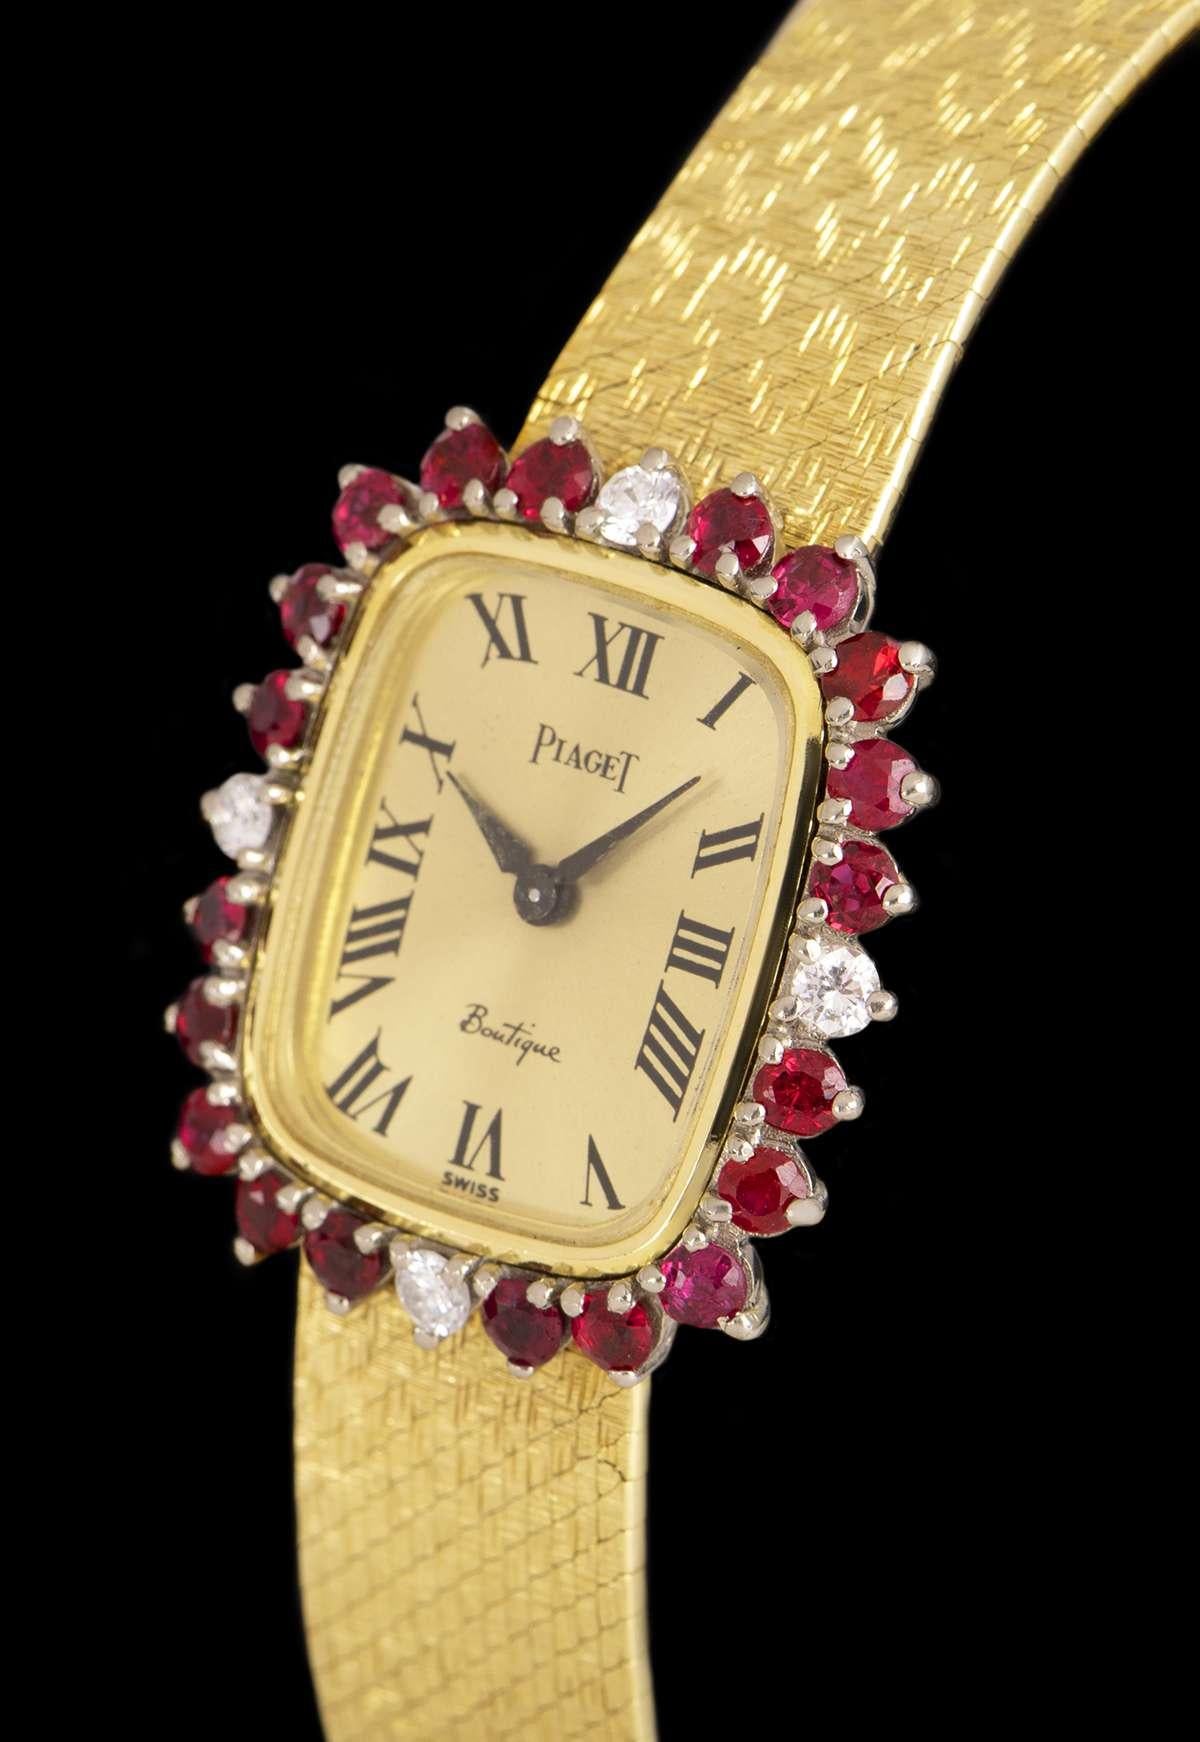 A 25 mm 18kYellow Gold Women's Dress Wristwatch, champagne dial with Roman numerals, a fixed 18k yellow gold bezel set with 20round brilliant-cut rubies and 4 round brilliant cut diamonds, an 18k yellow gold jewellery style bracelet with an 18k